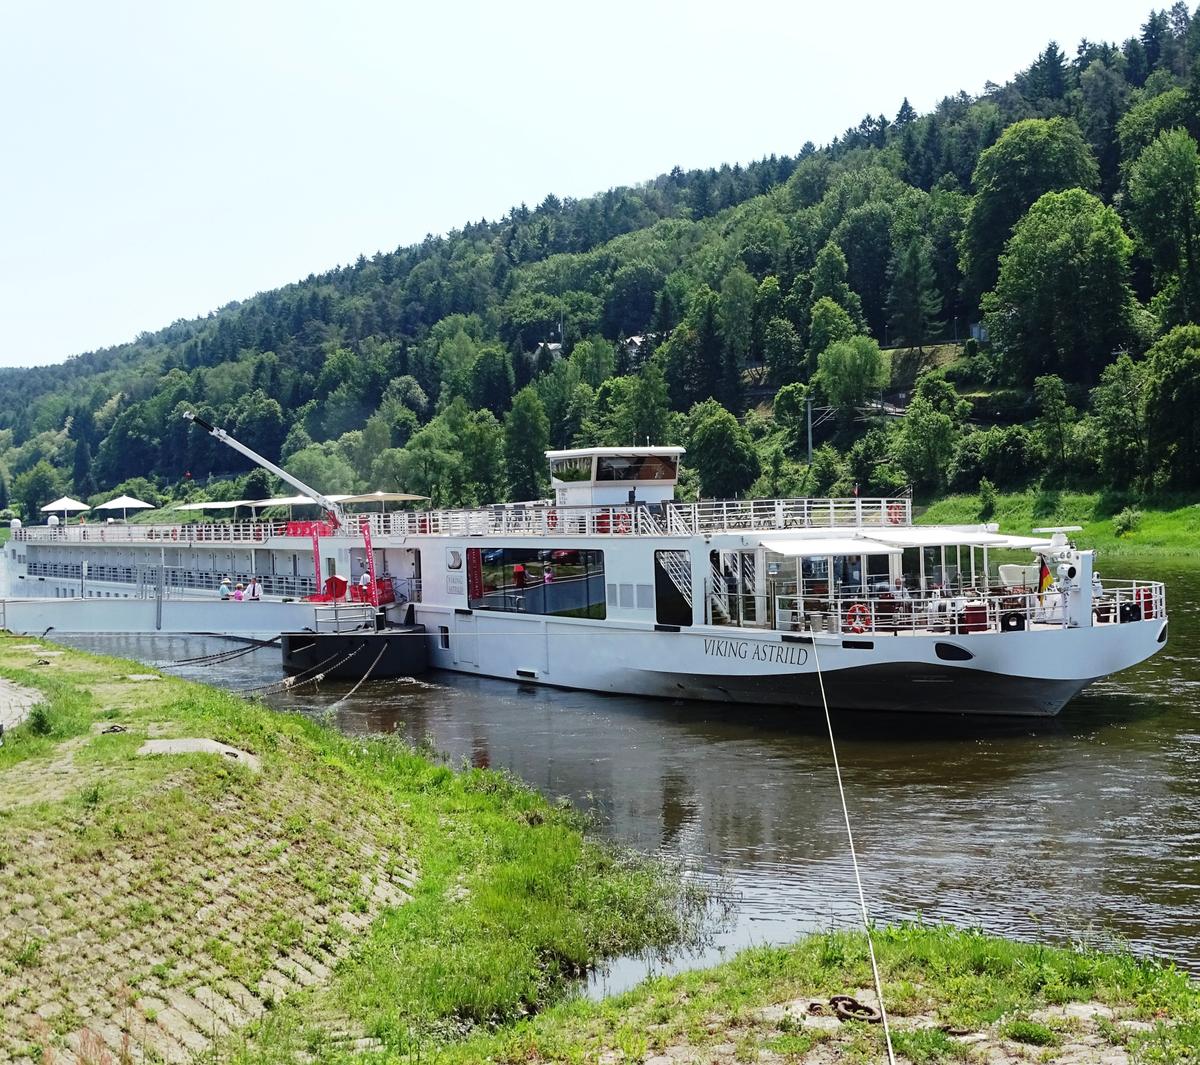 The Viking Astrild is docked along the Elbe River. (John M. Smith)